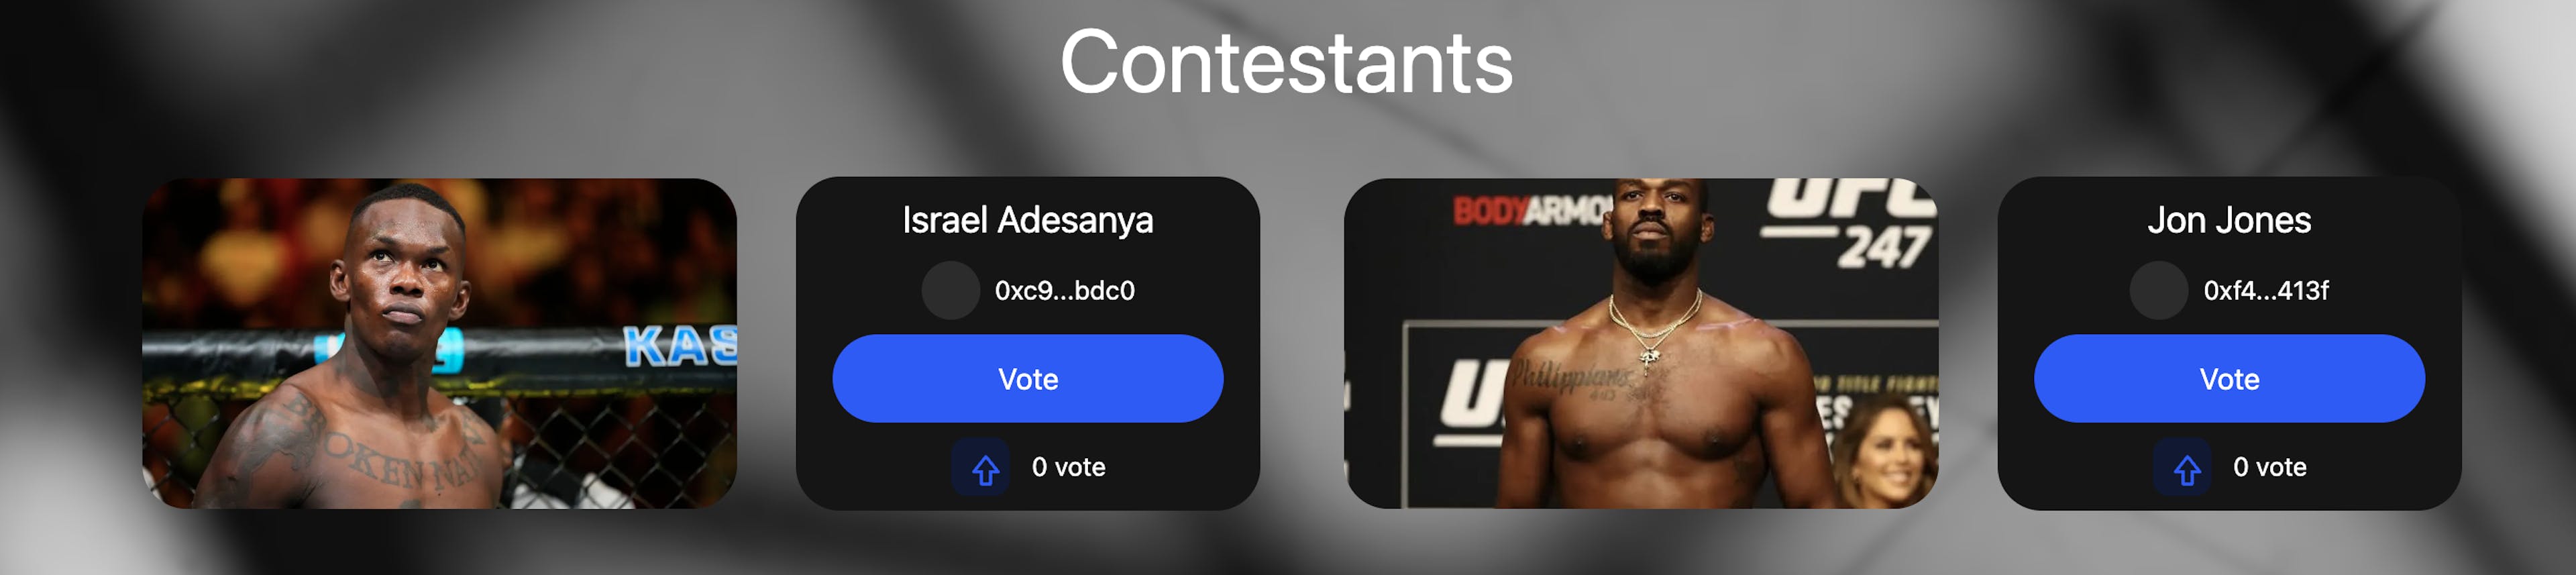 The Contestant Component